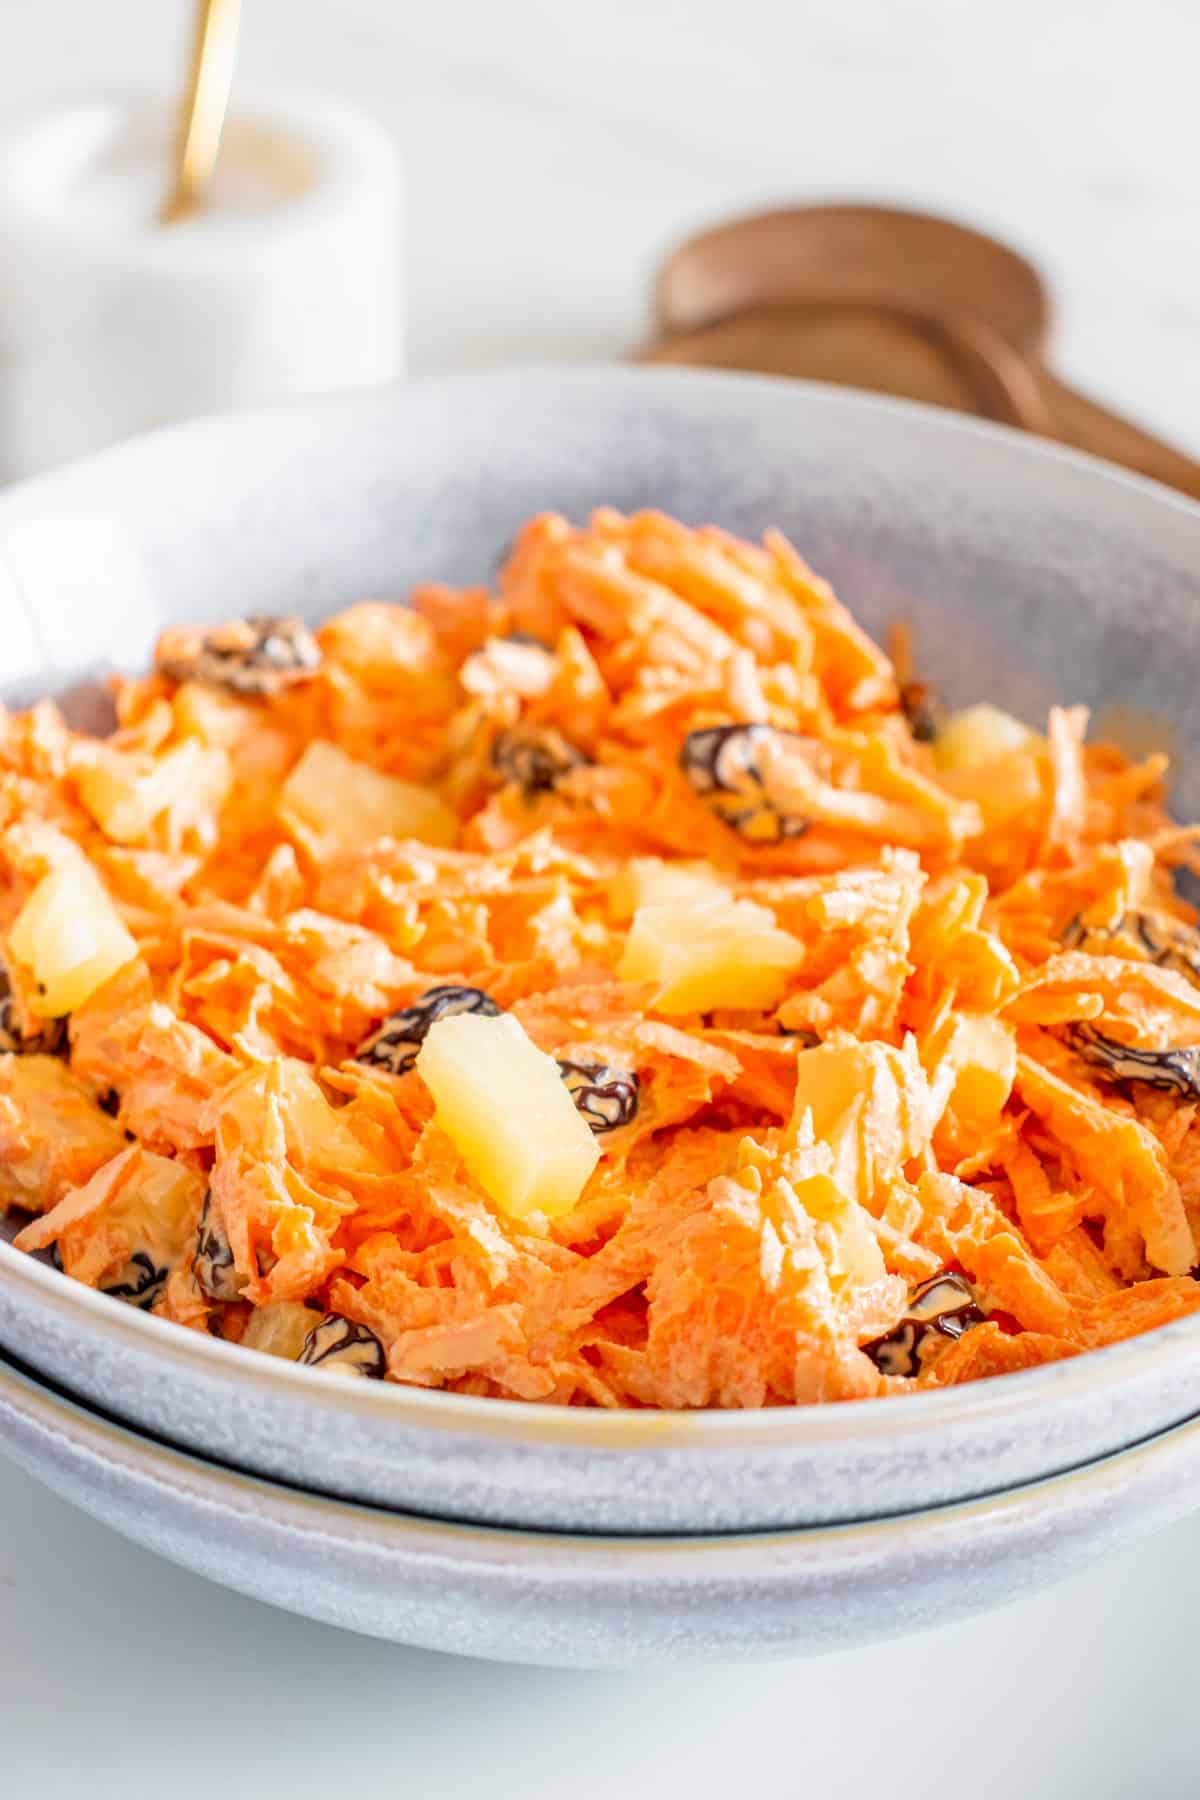 Carrot salad in a bowl on a table.